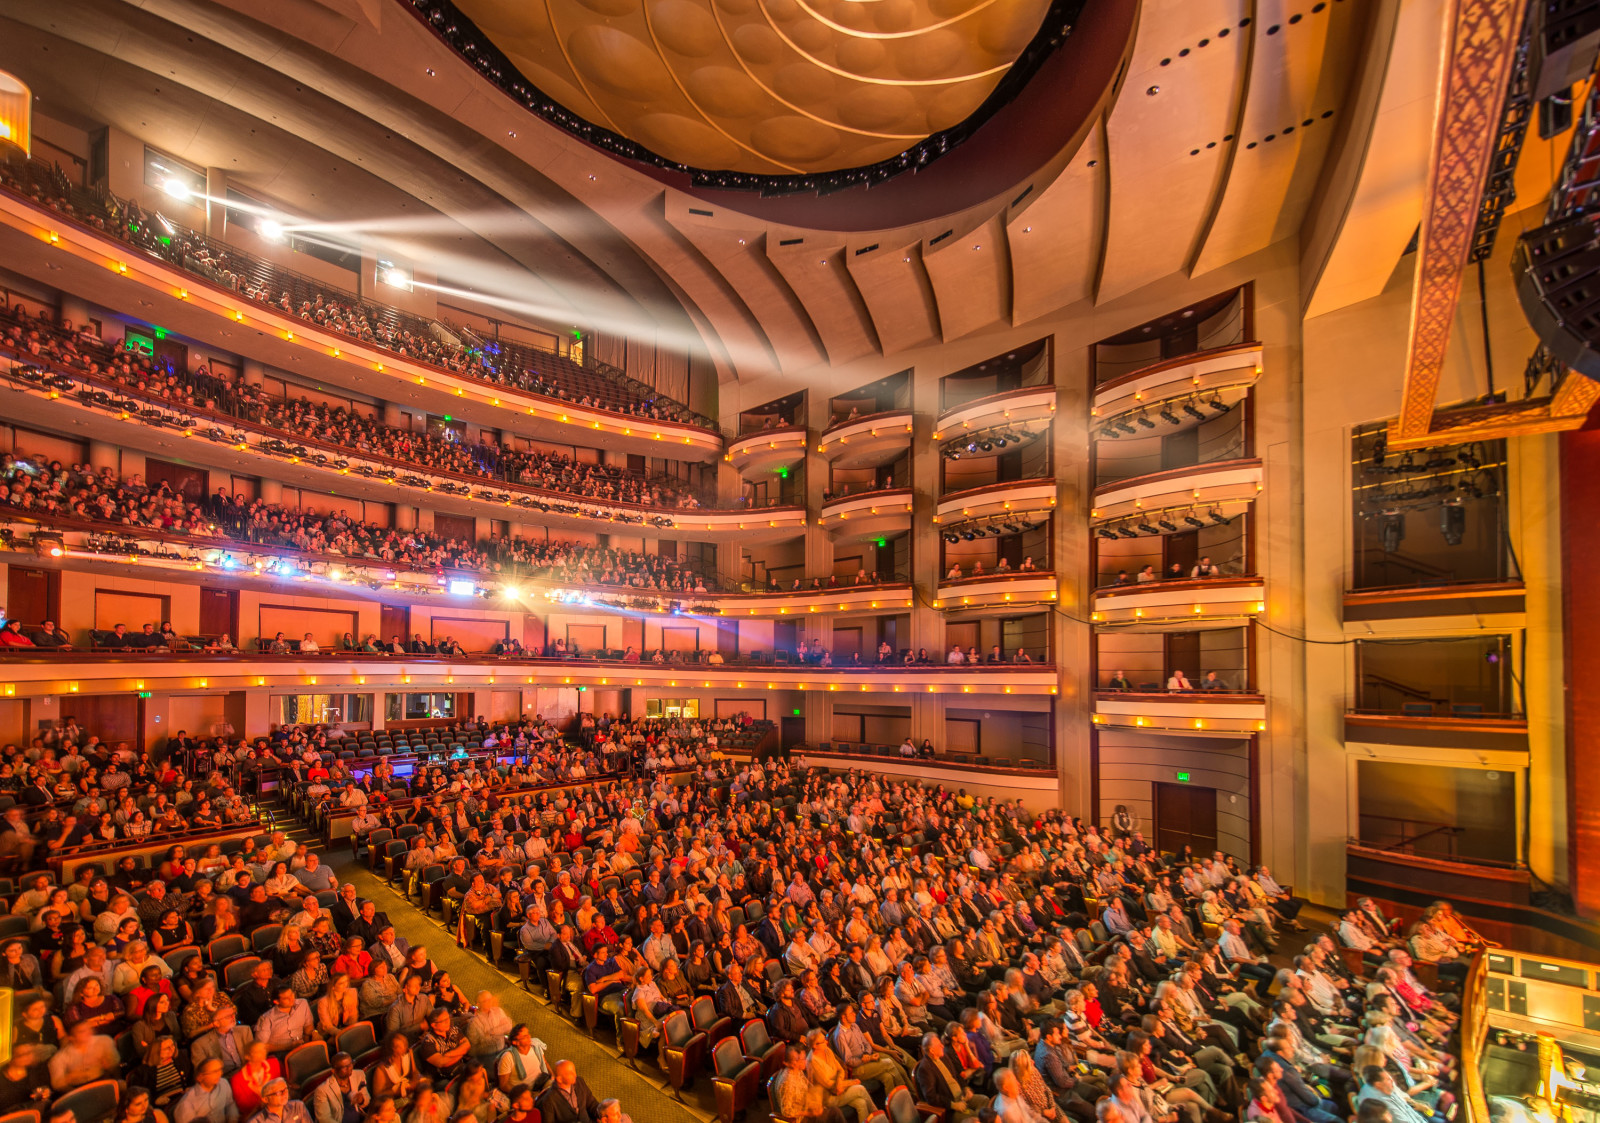 Adrienne Arsht Center for the Performing Arts of MiamiDade County